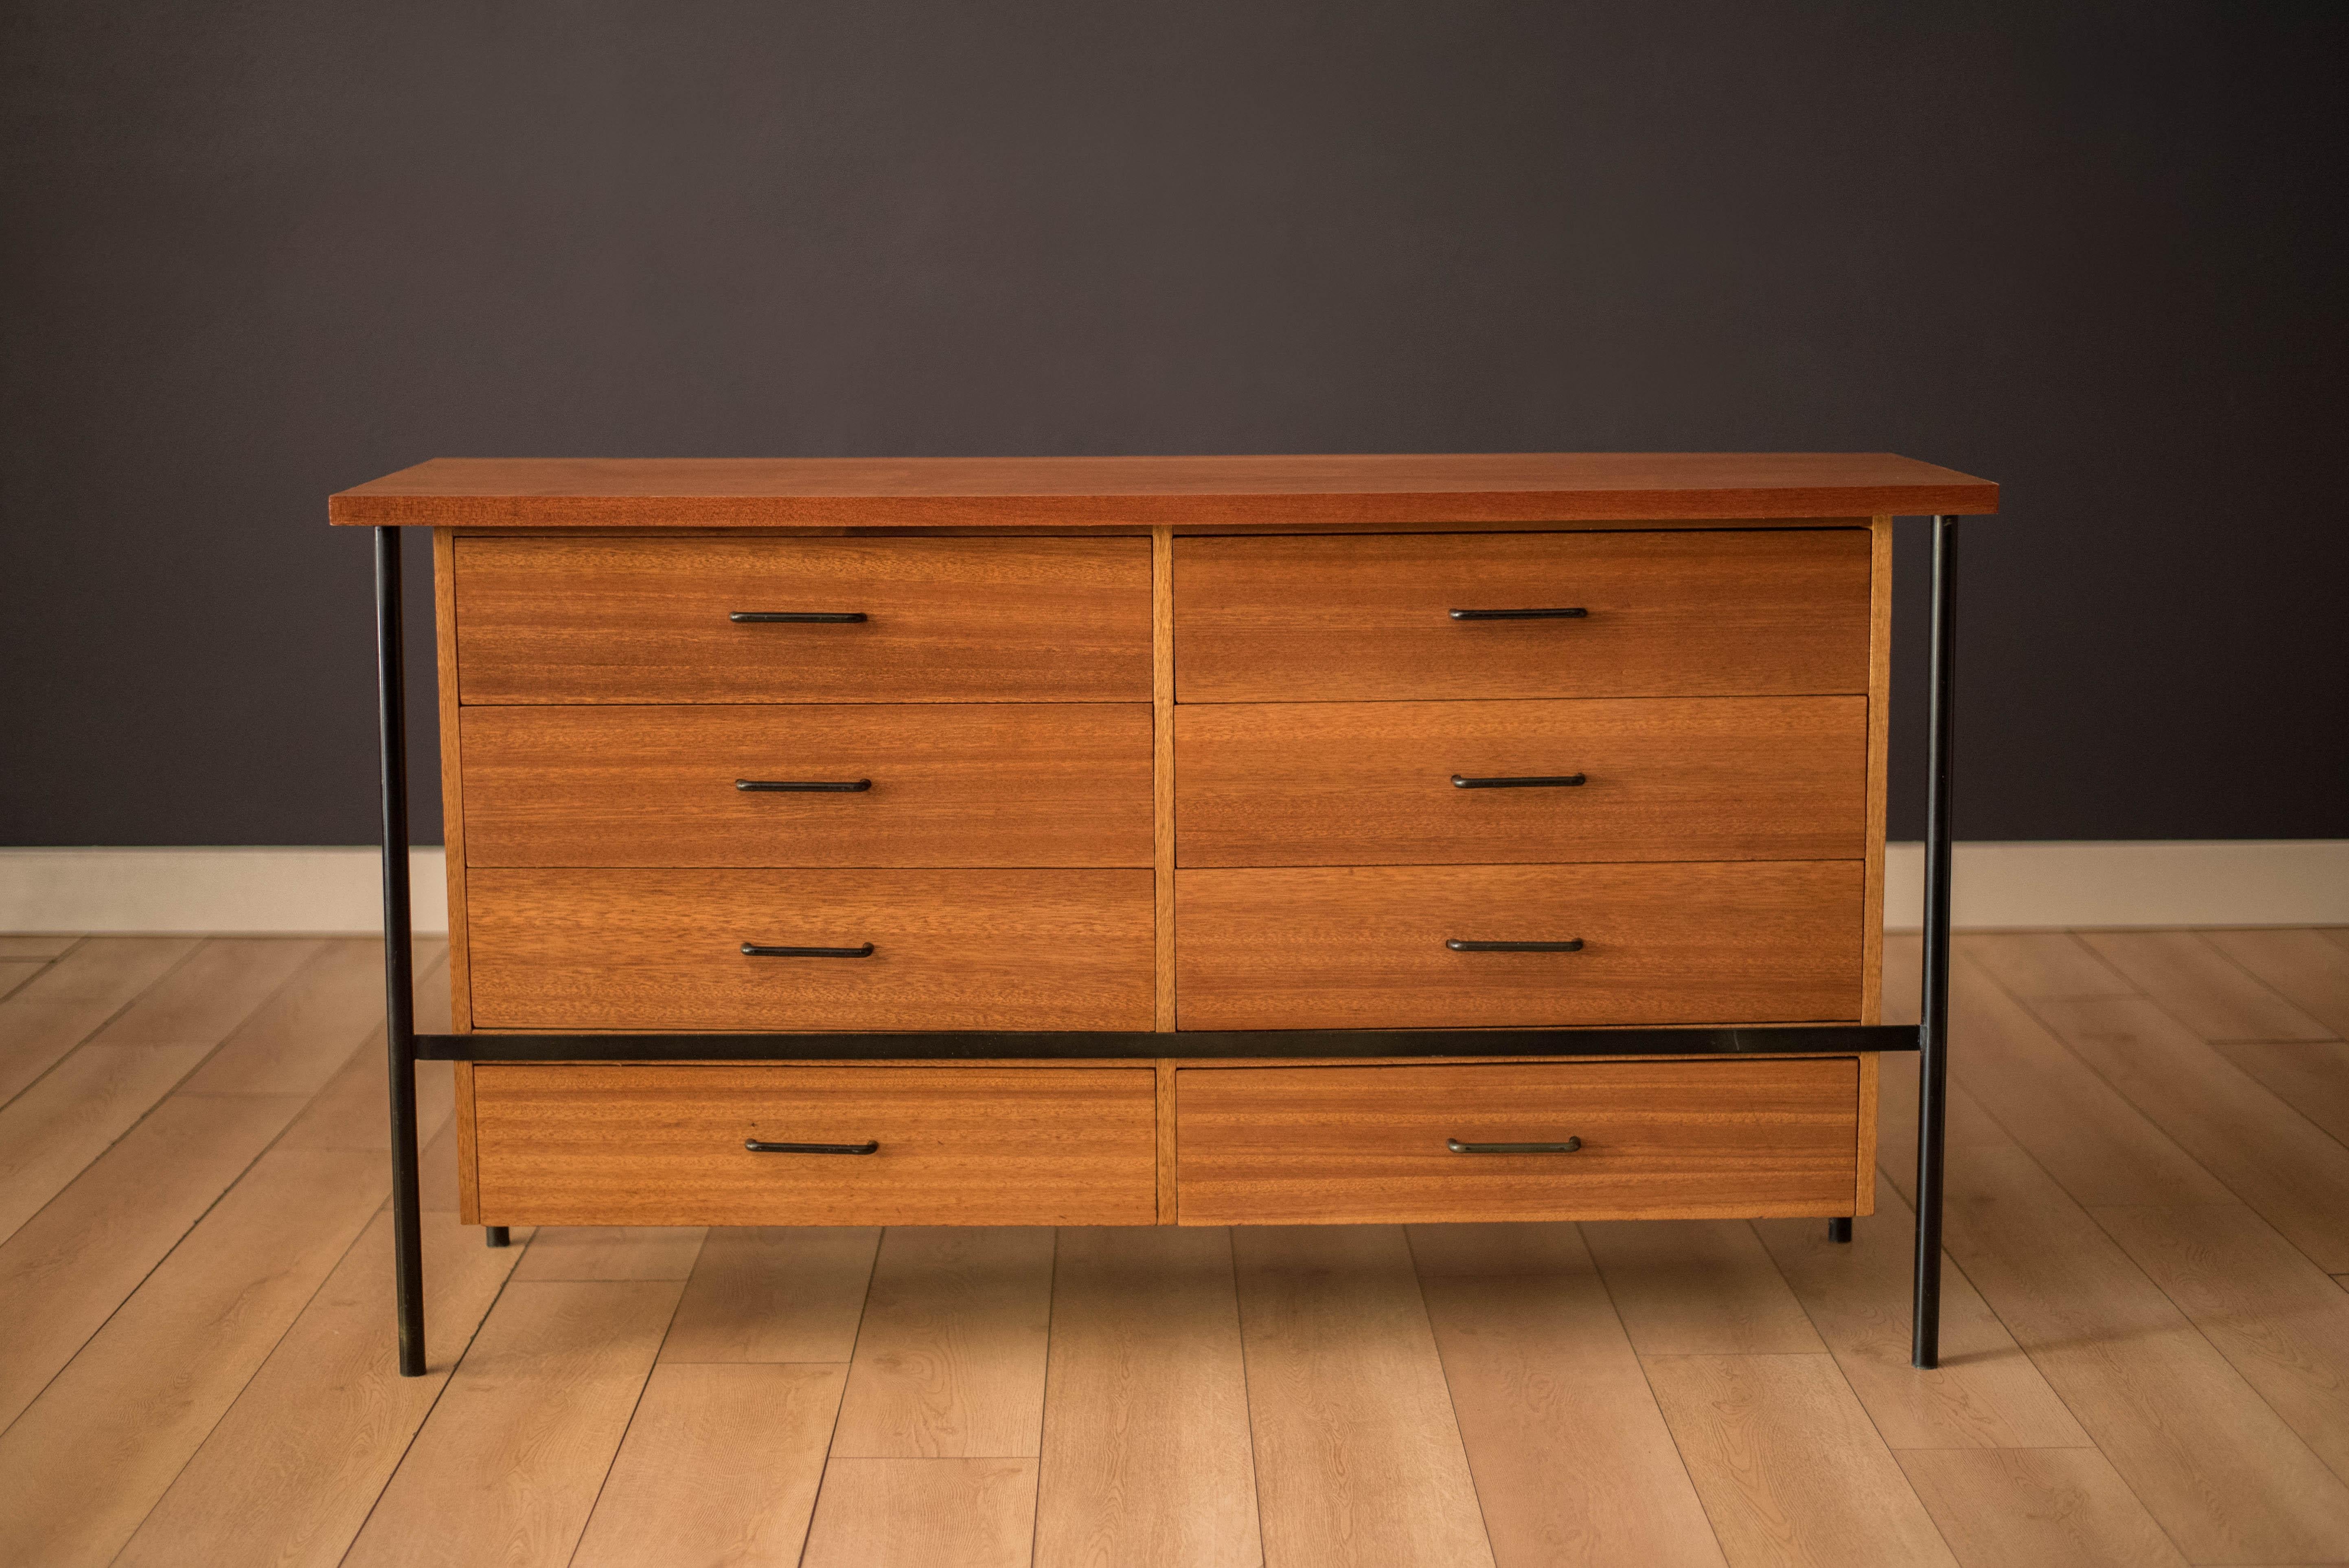 Vintage double dresser in mahogany designed by Don Knorr for Vista of California circa 1950's. This unique piece offers plenty of storage including eight dovetailed drawers supported by a heavy steel frame accented with the original black hardware.